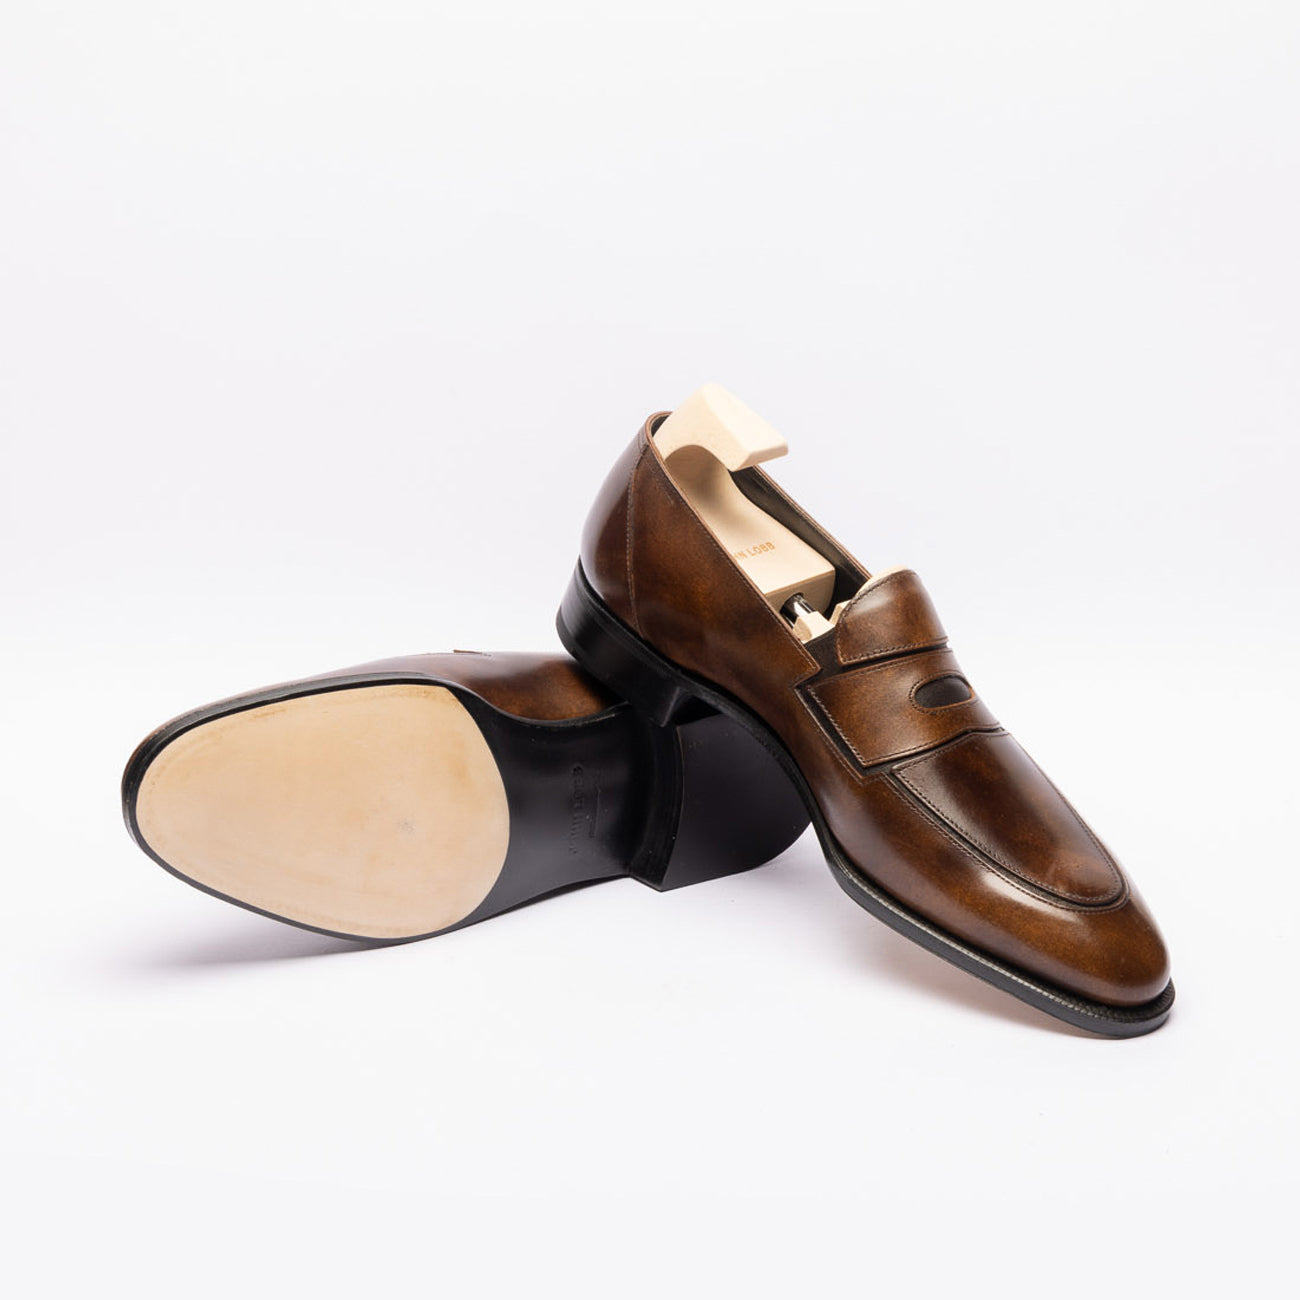 John Lobb Montgomery penny loafer in brown leather